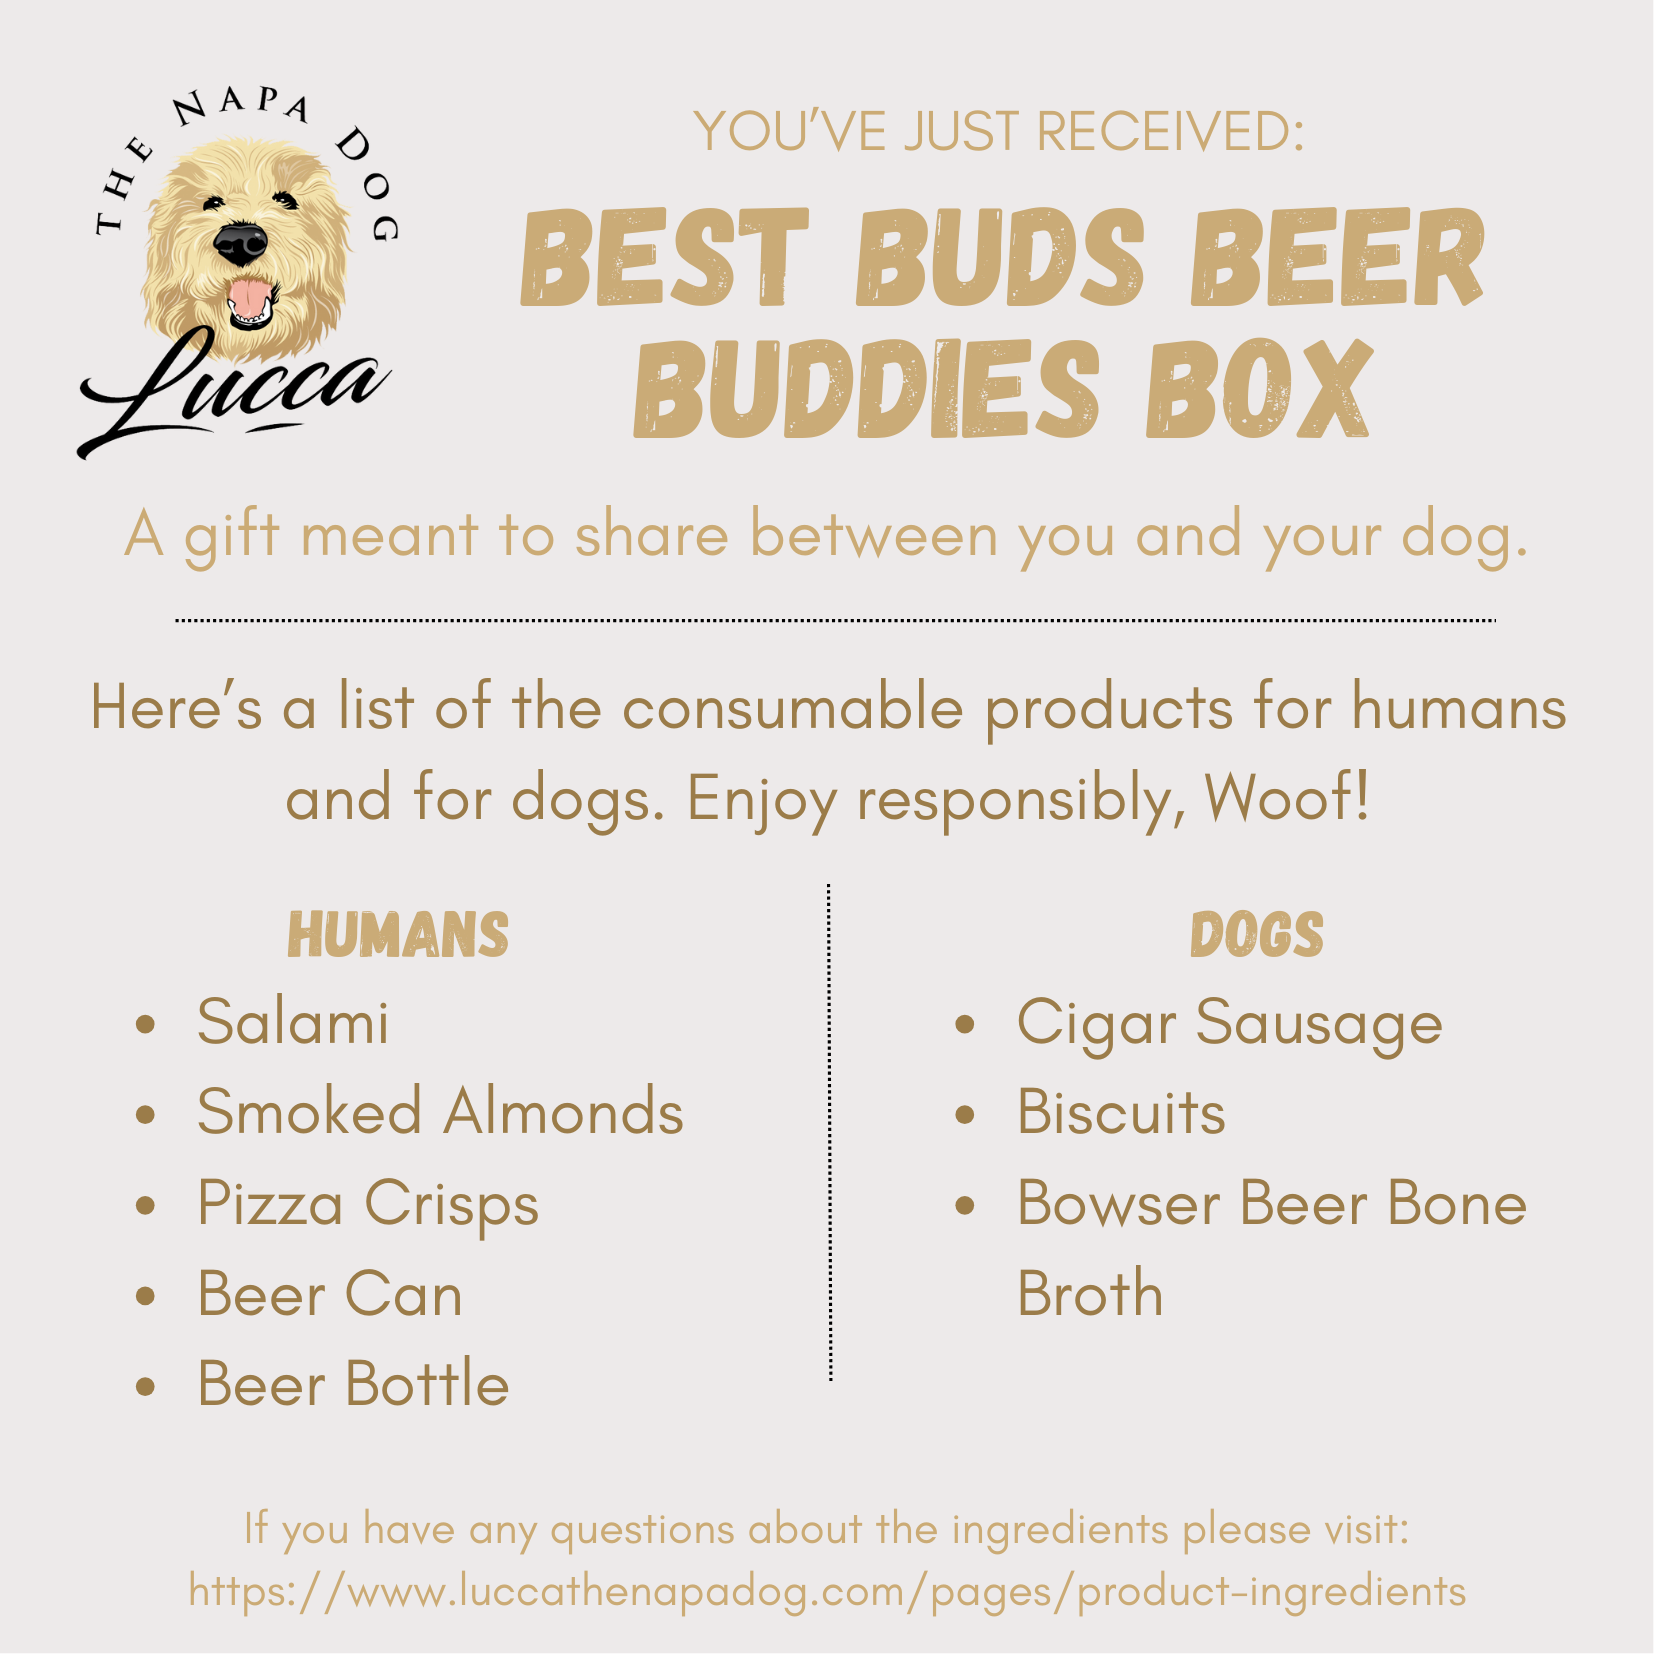 ingredient insert of consumable products in best buds beer buddies by lucca gift box